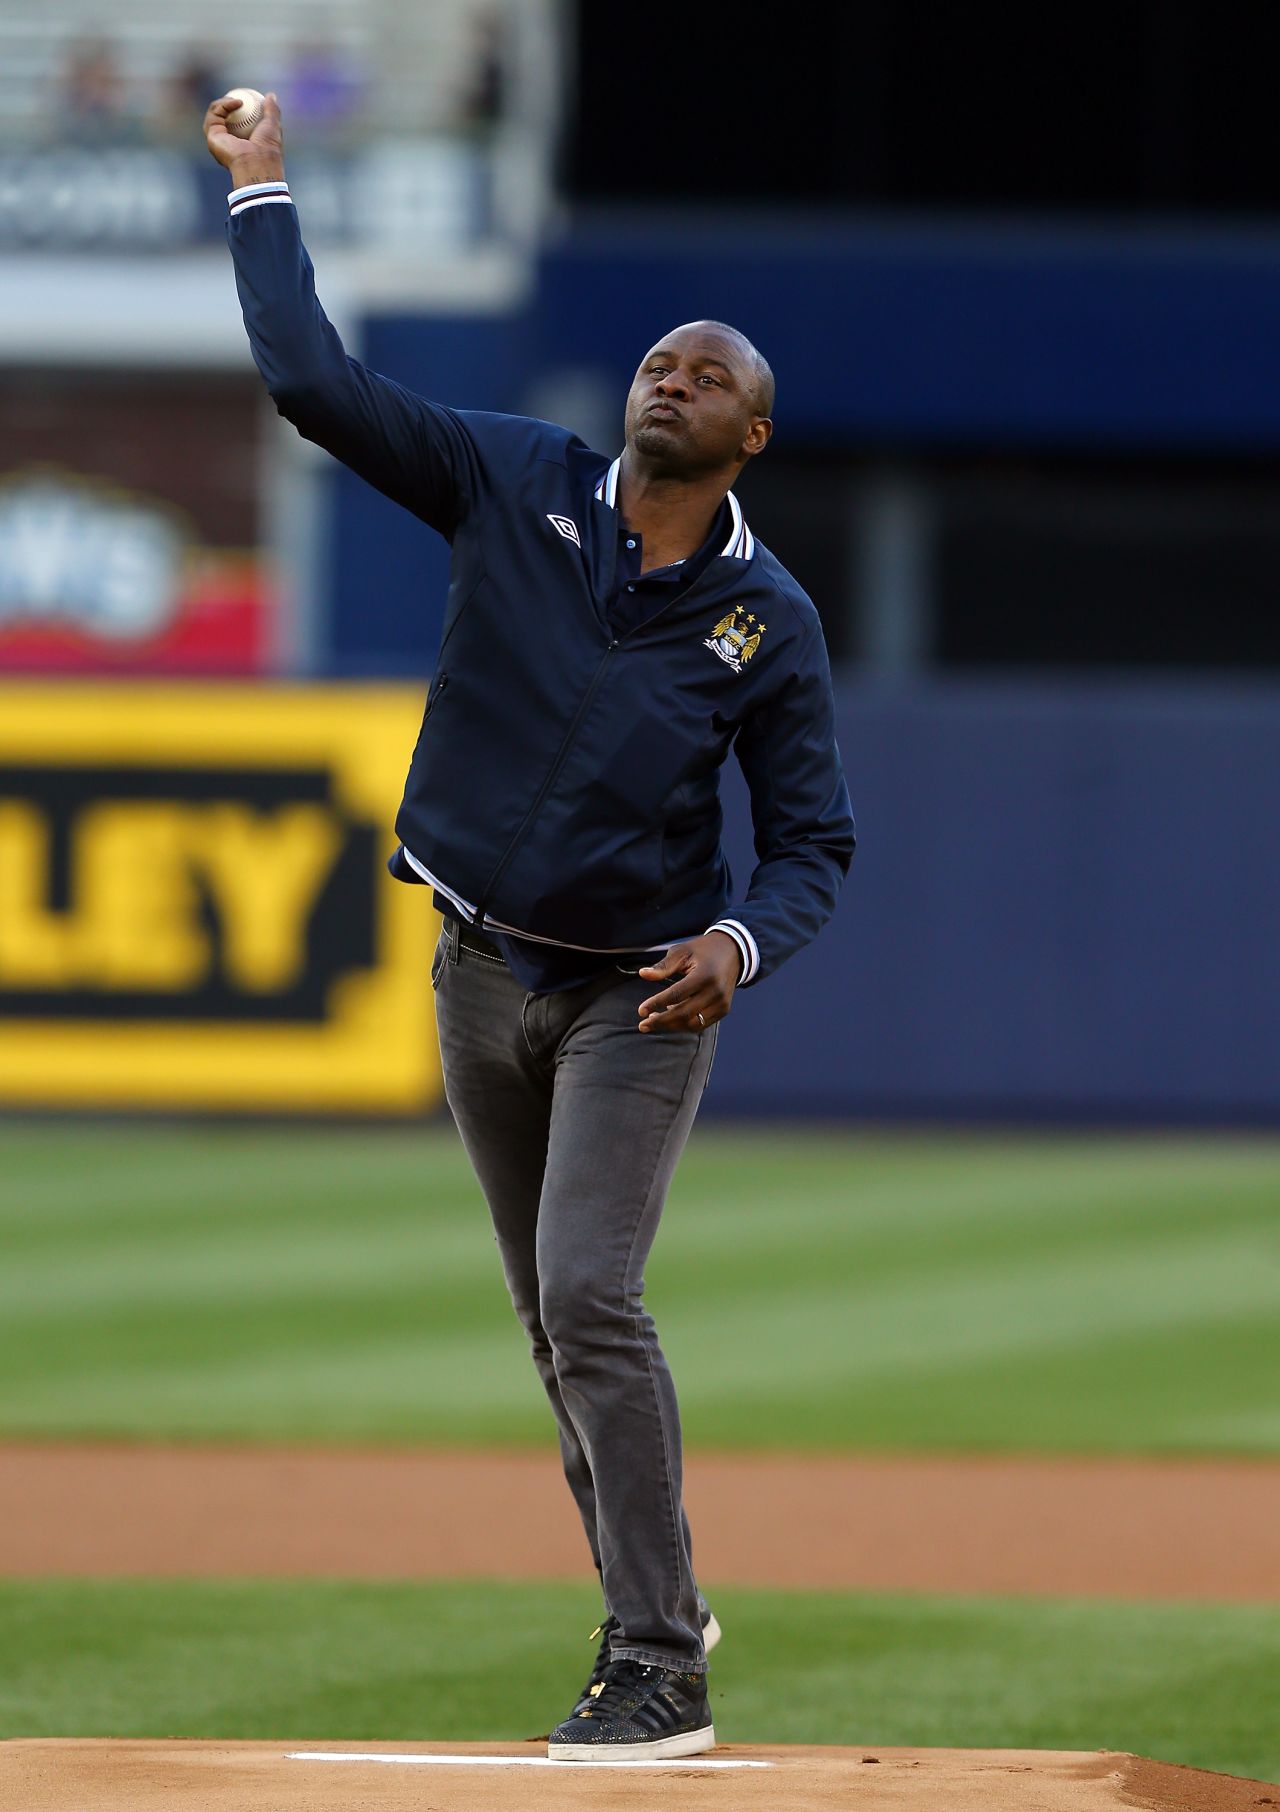 Former Manchester City star Patrick Vieira threw a ceremonial pitch at a recent New York Yankees game against Toronto.